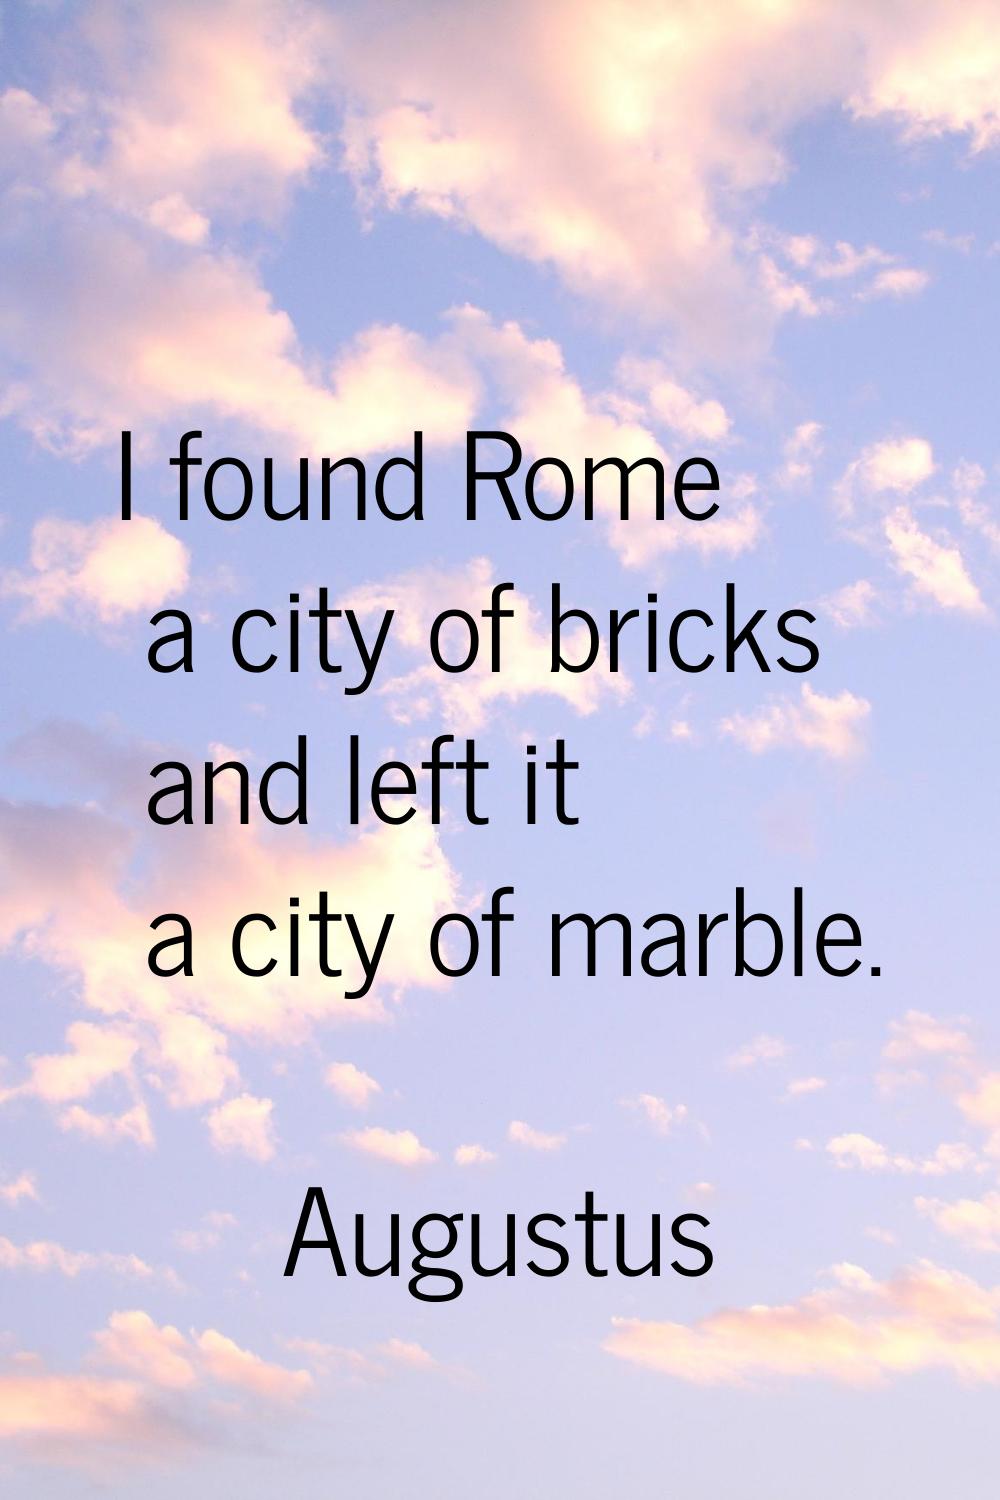 I found Rome a city of bricks and left it a city of marble.